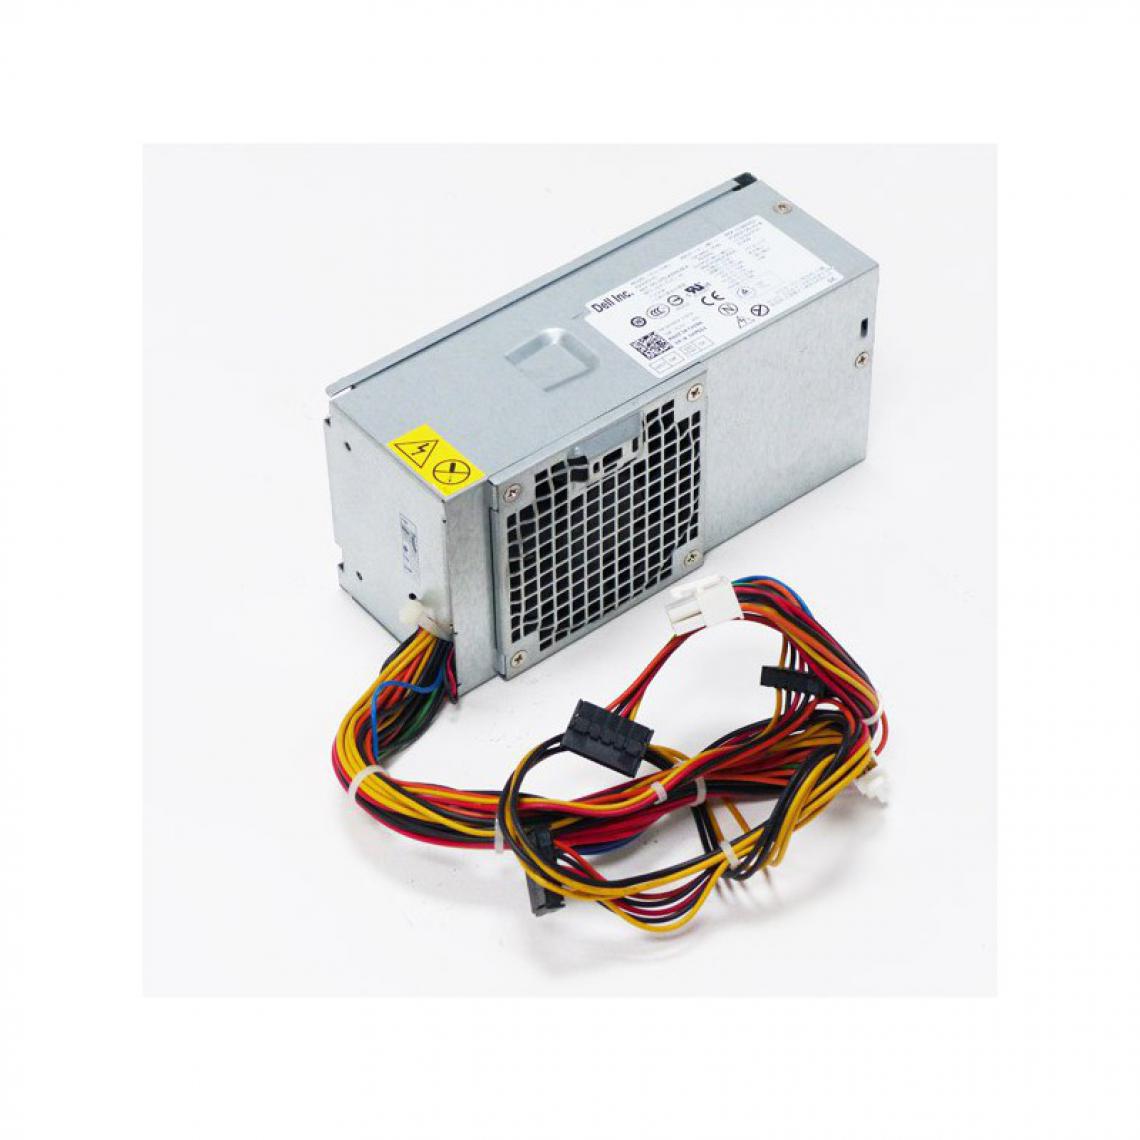 Dell - Alimentation DELL Optiplex 790 DT L250AD-00 PS-5251-01D FY9H3 250W Power Supply - Alimentation modulaire